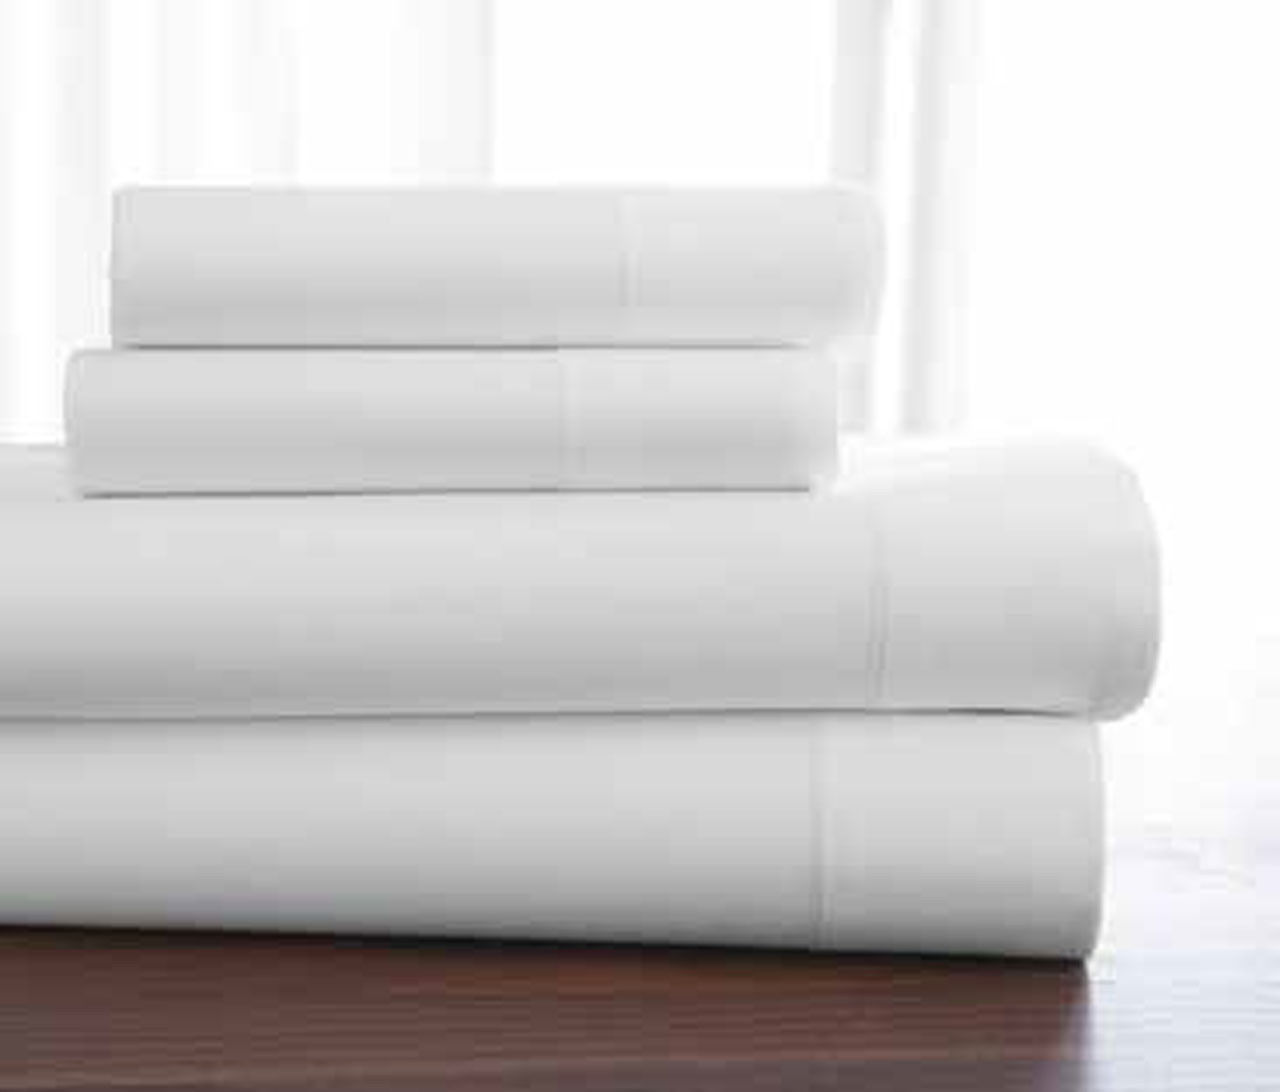 Which company makes the Welspun T-400 Premium hygrocotton sheets?